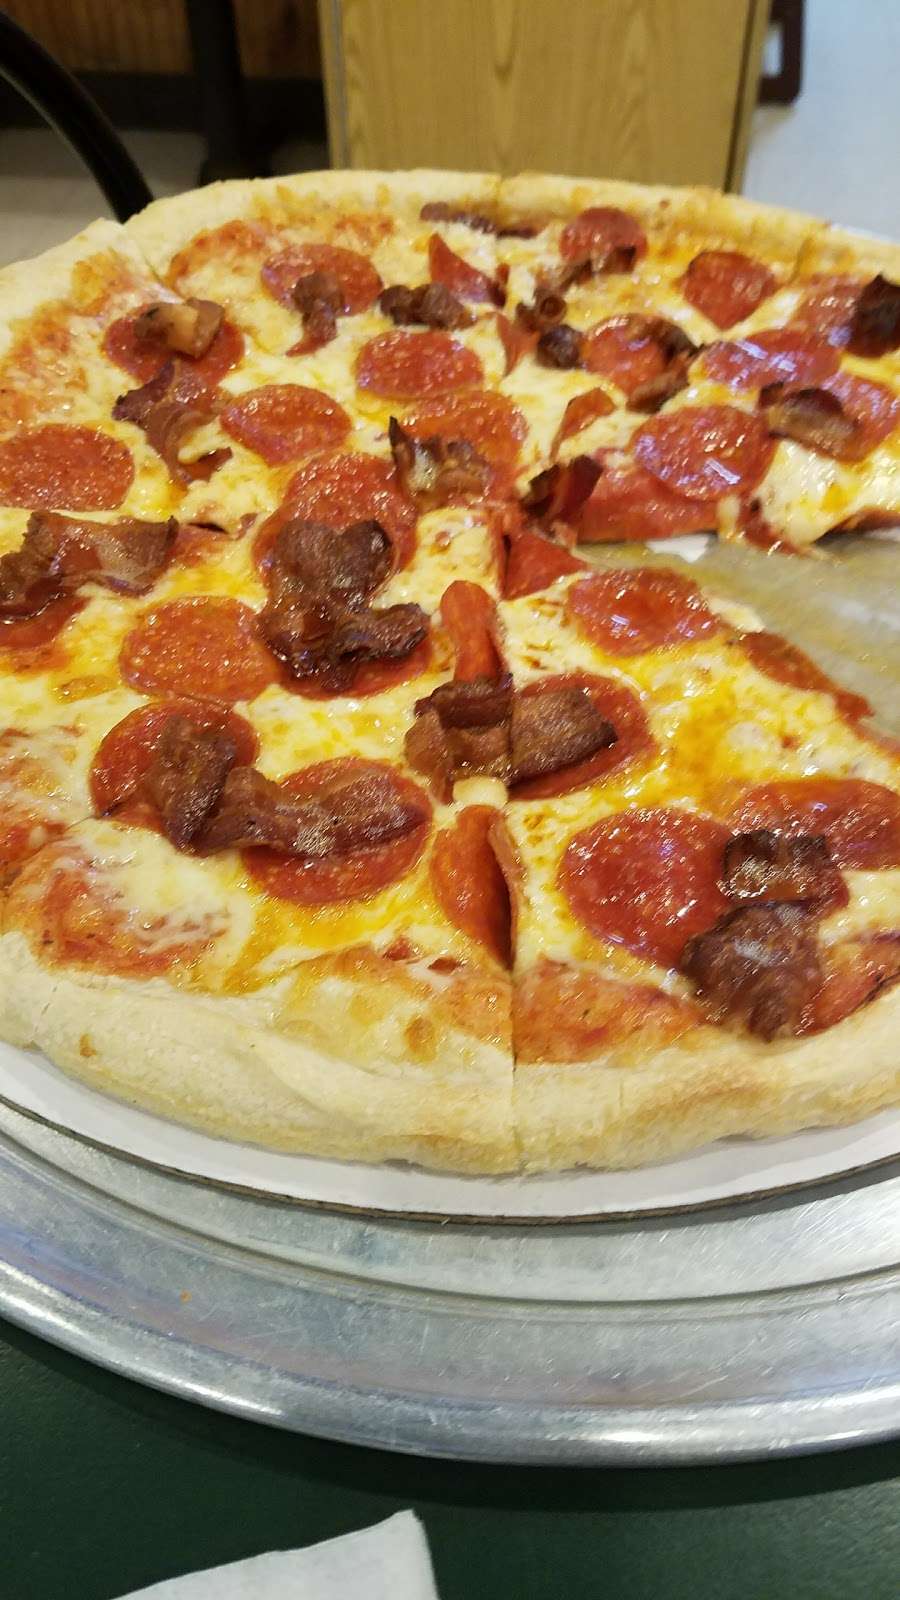 Kendall Pond Pizza Restaurant | 7 Mammoth Rd, Windham, NH 03087 | Phone: (603) 595-5990